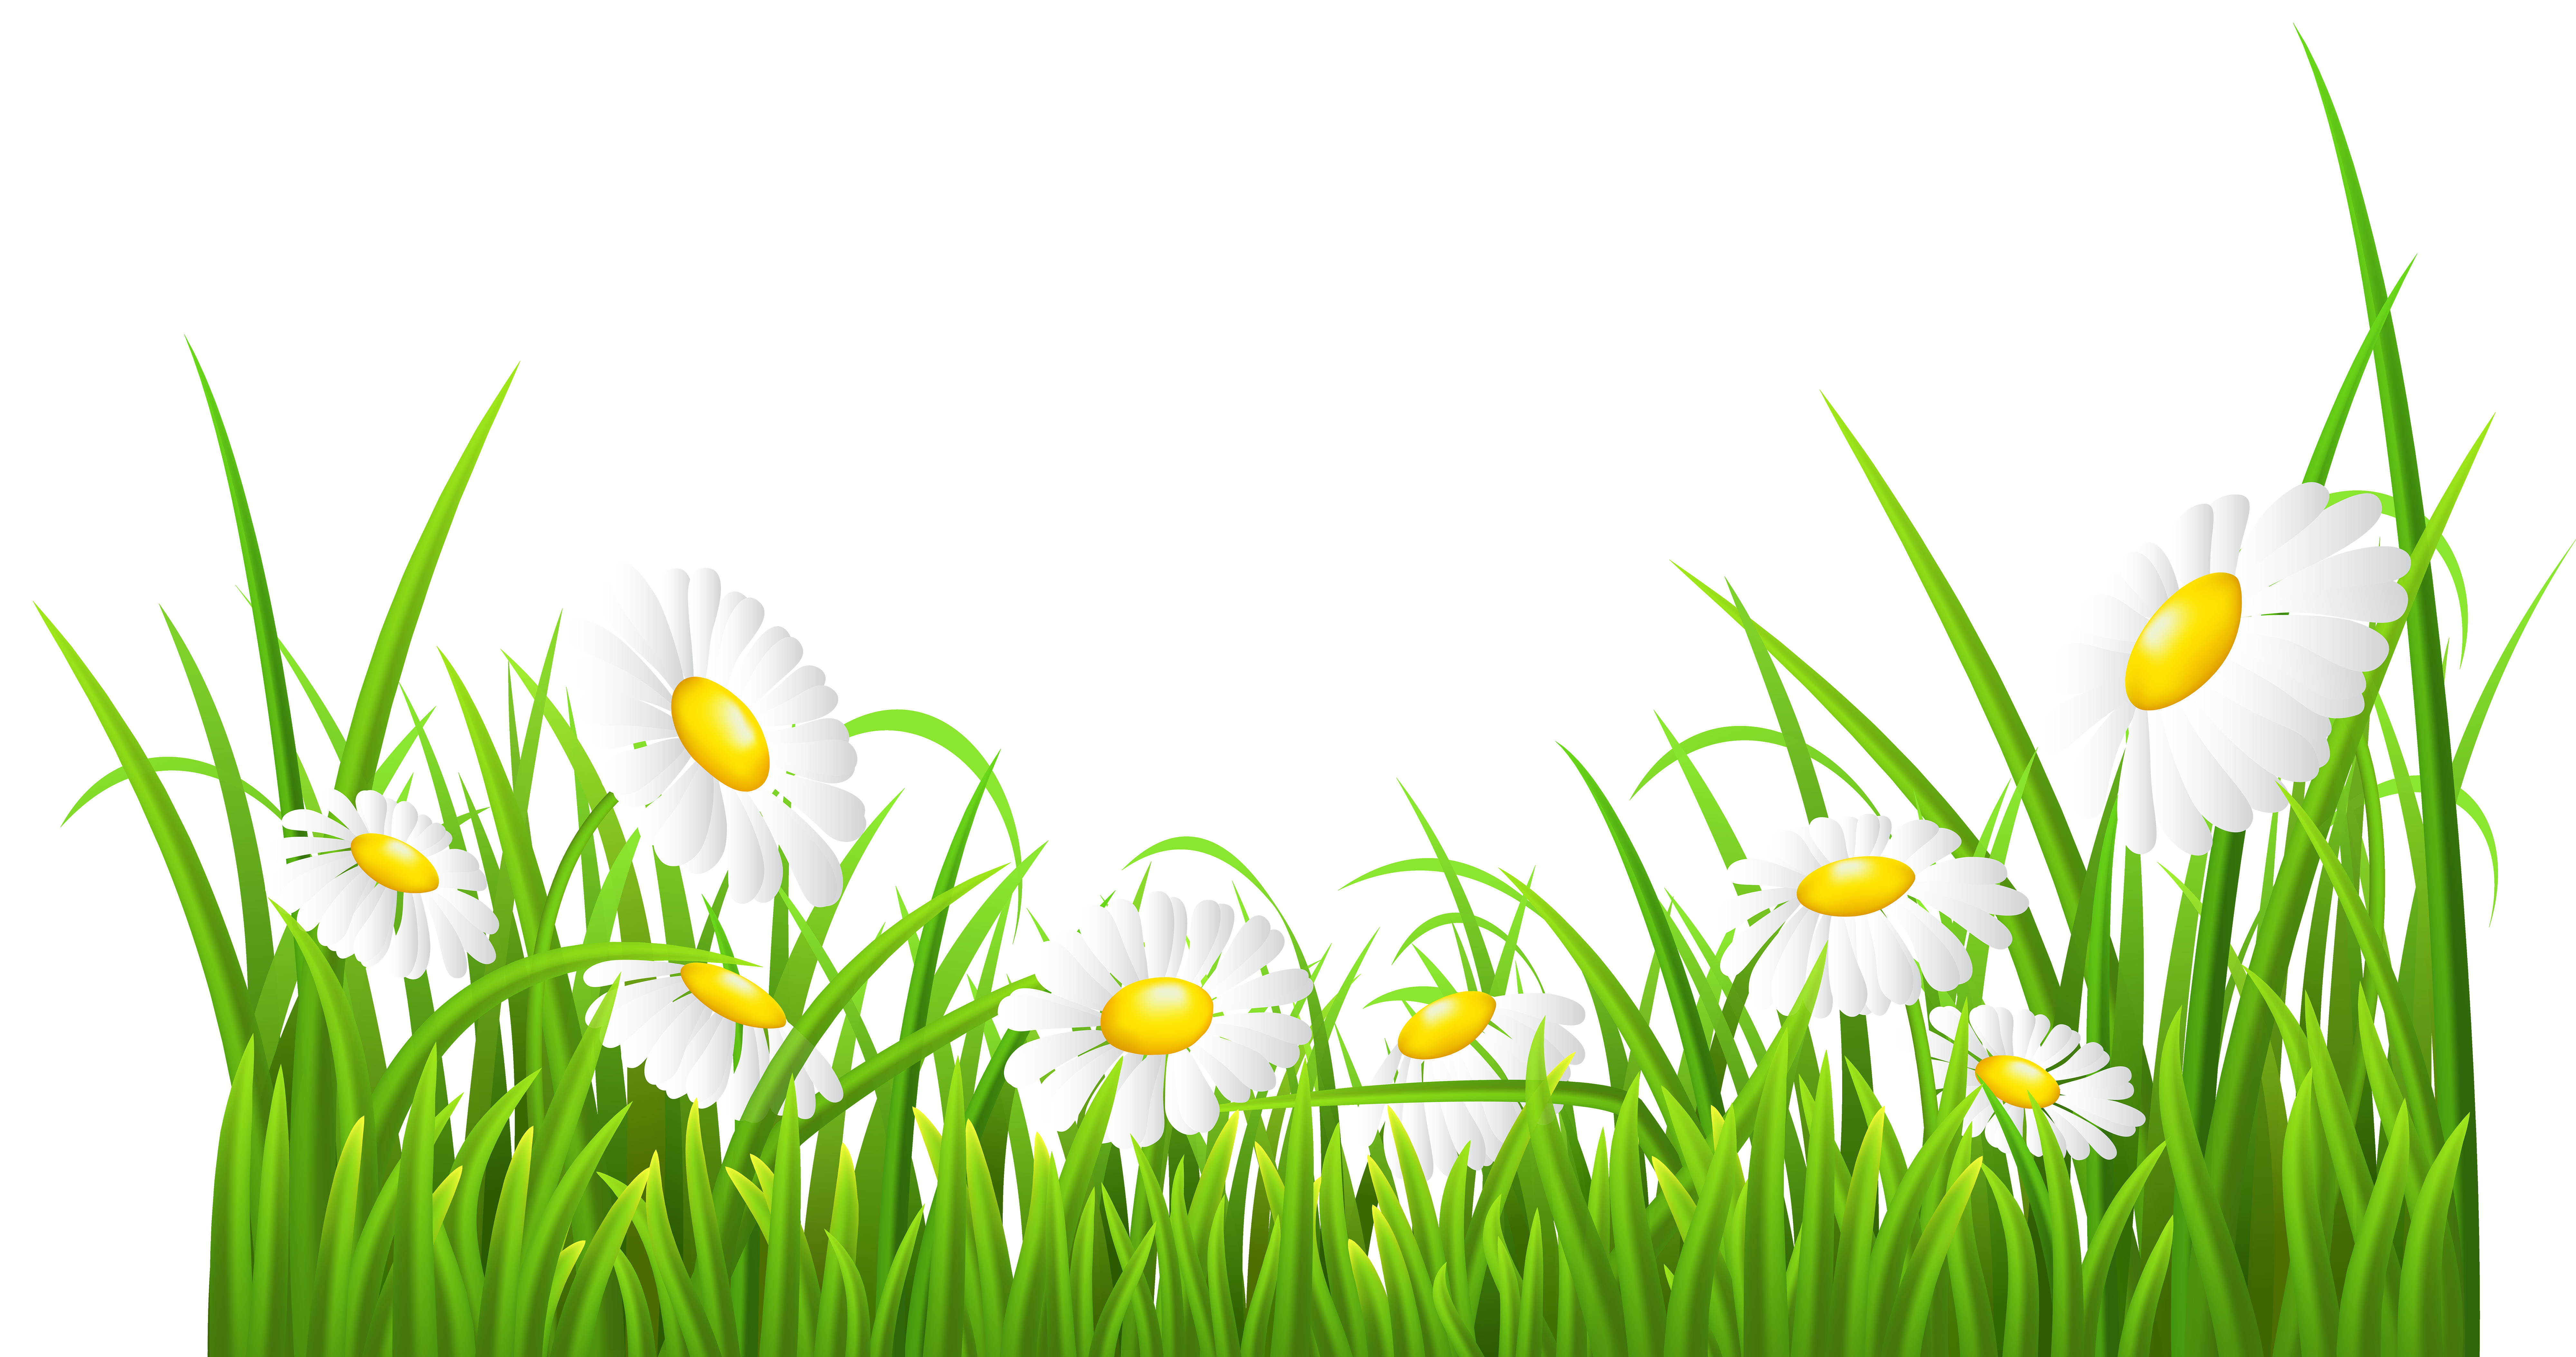 Grass clipart rock. White daisies and transparent